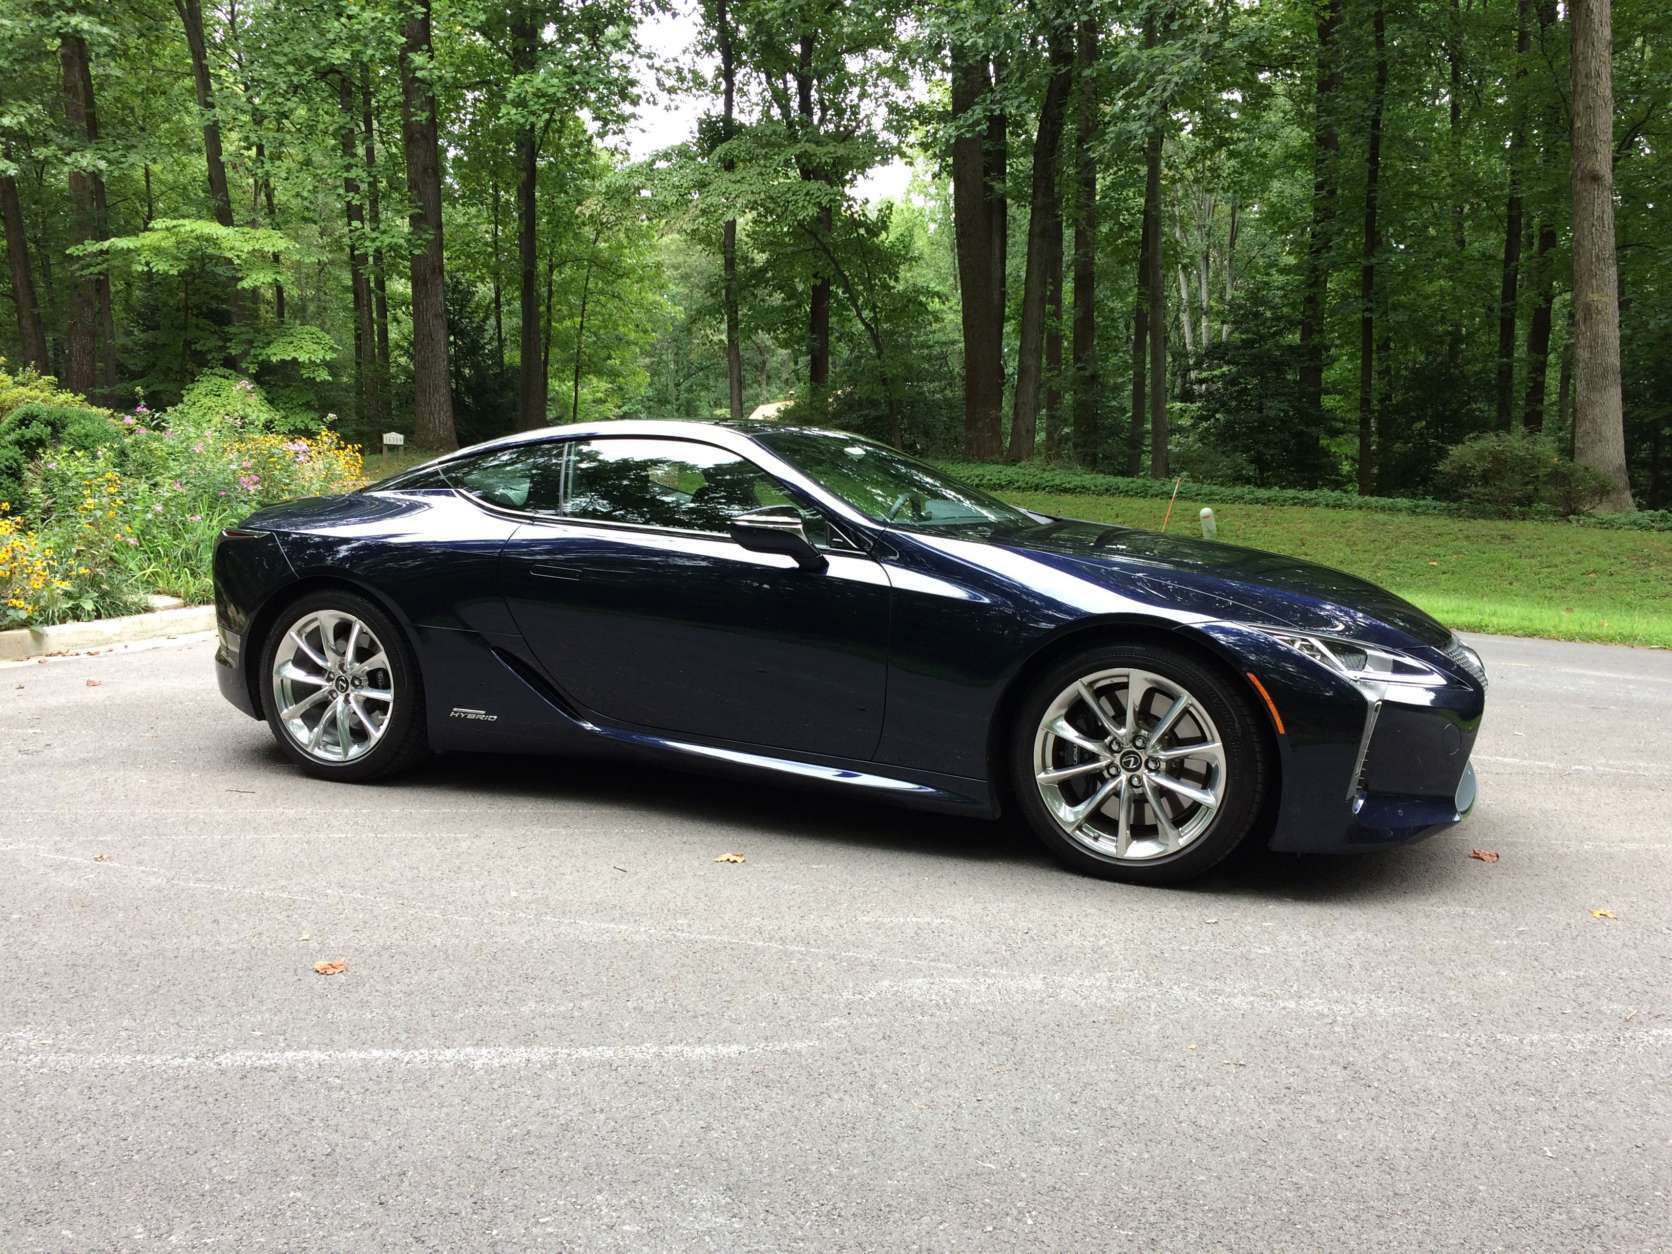 Starting at around $96,000, the hybrid version of the LC 500 coupe costs about $4,000 more than the coupe. (WTOP/Mike Parris) 